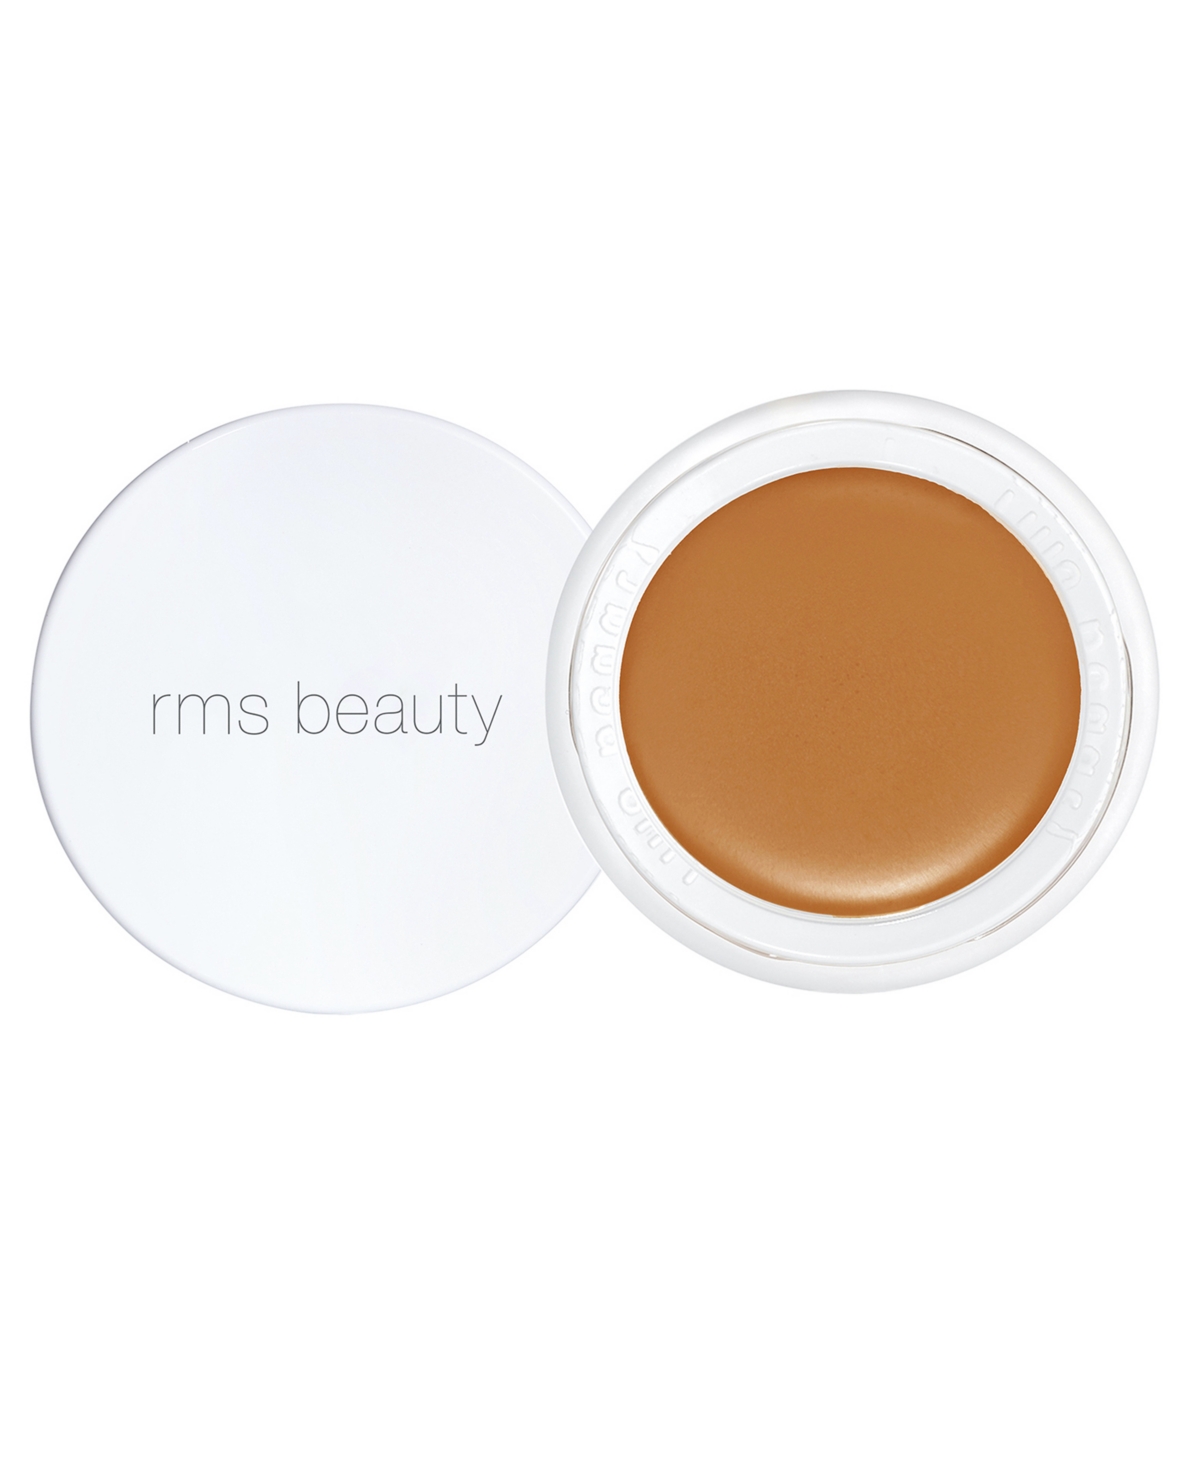 Rms Beauty Uncoverup Concealer In Golden Sienna